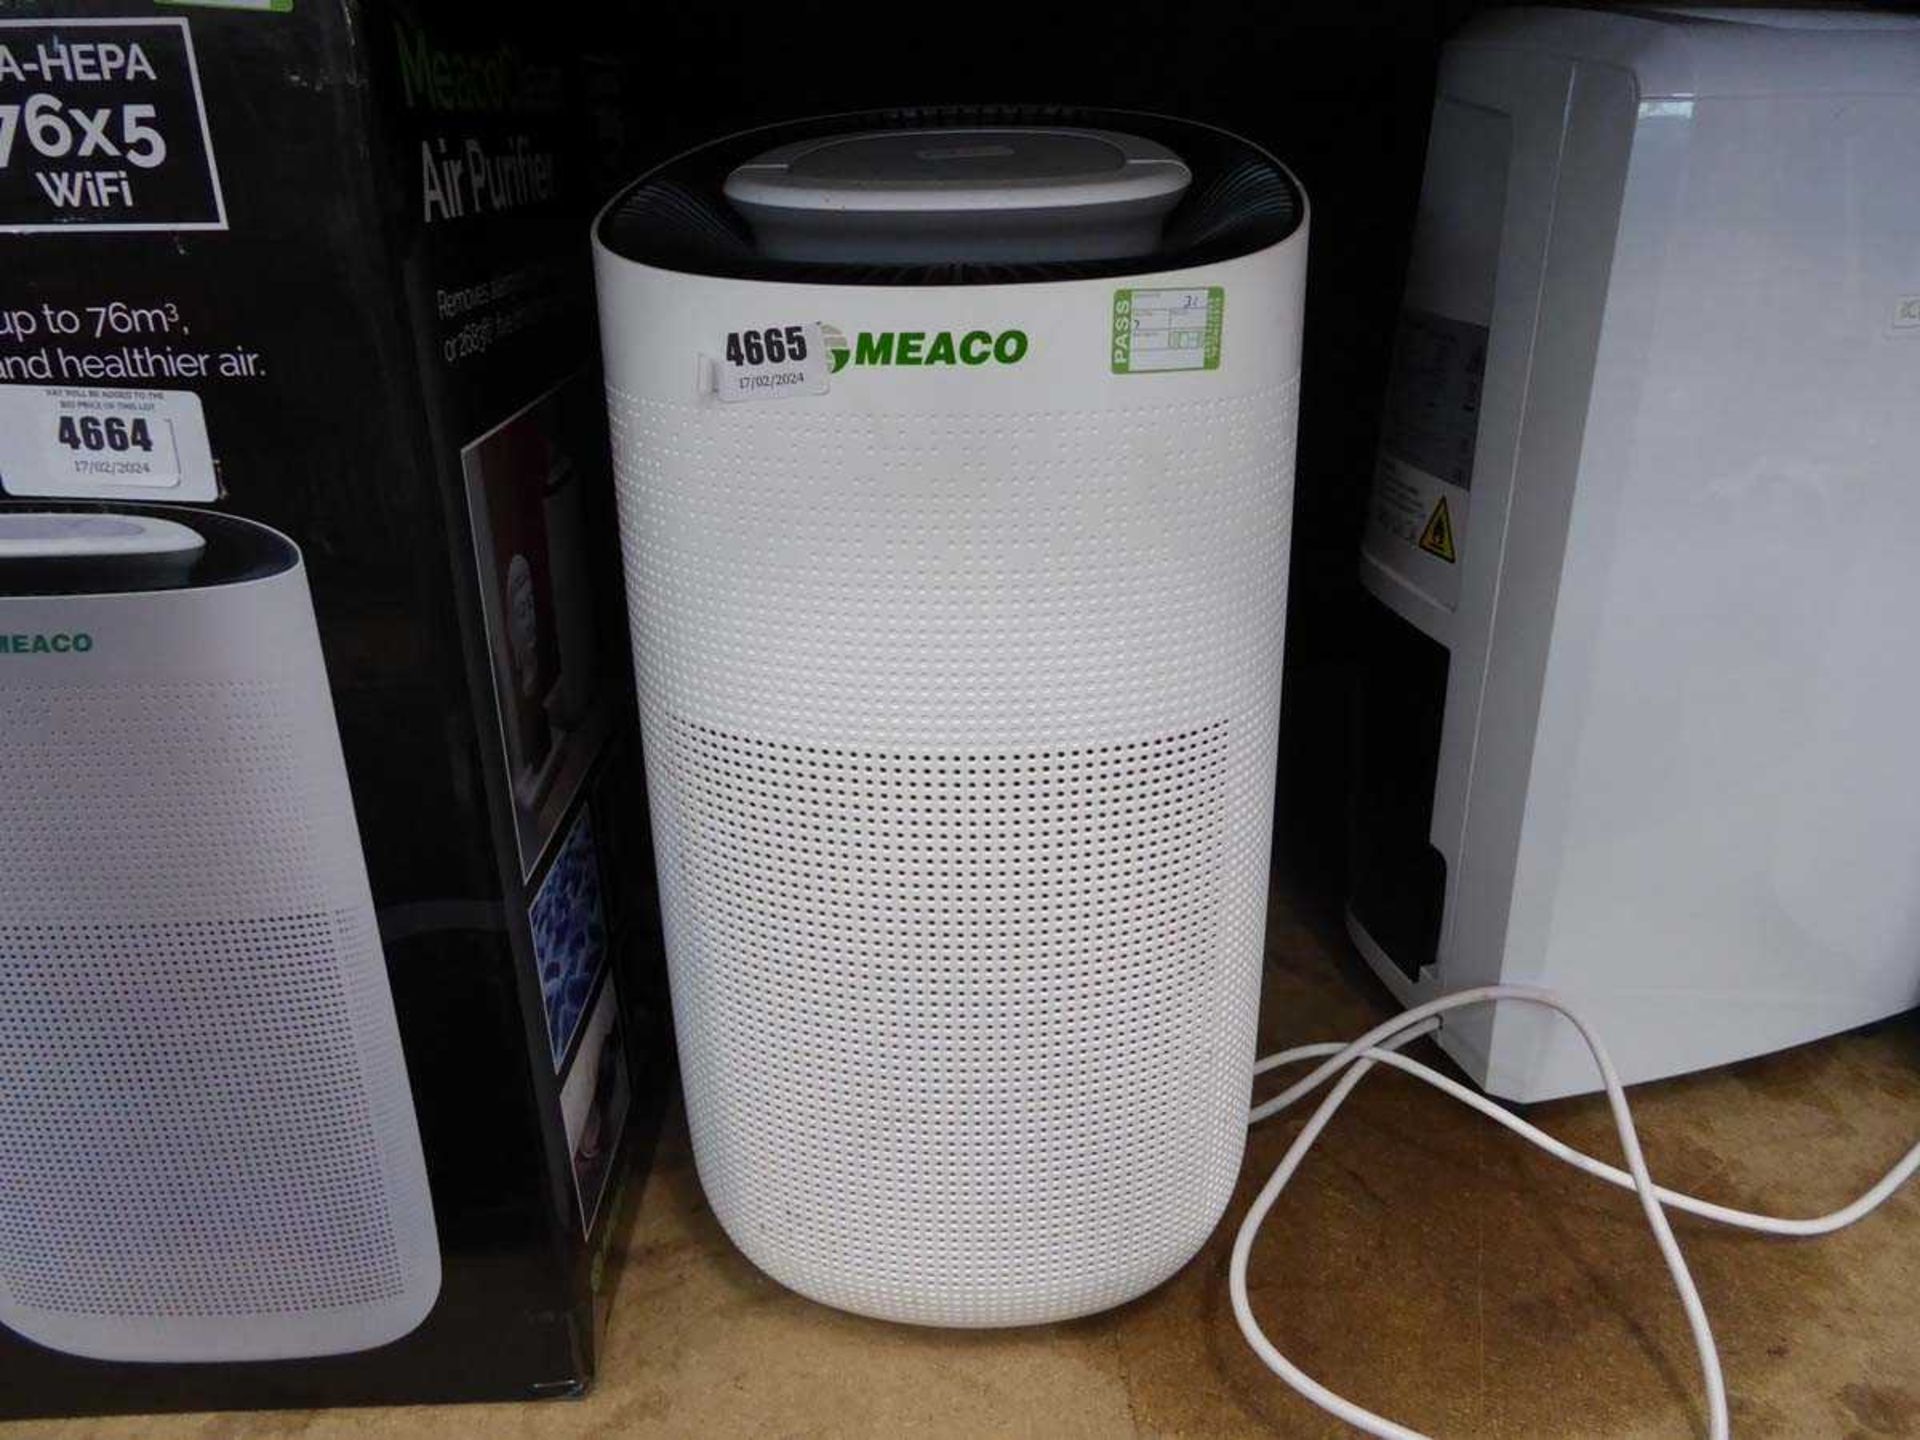 Unboxed Meaco air purifier